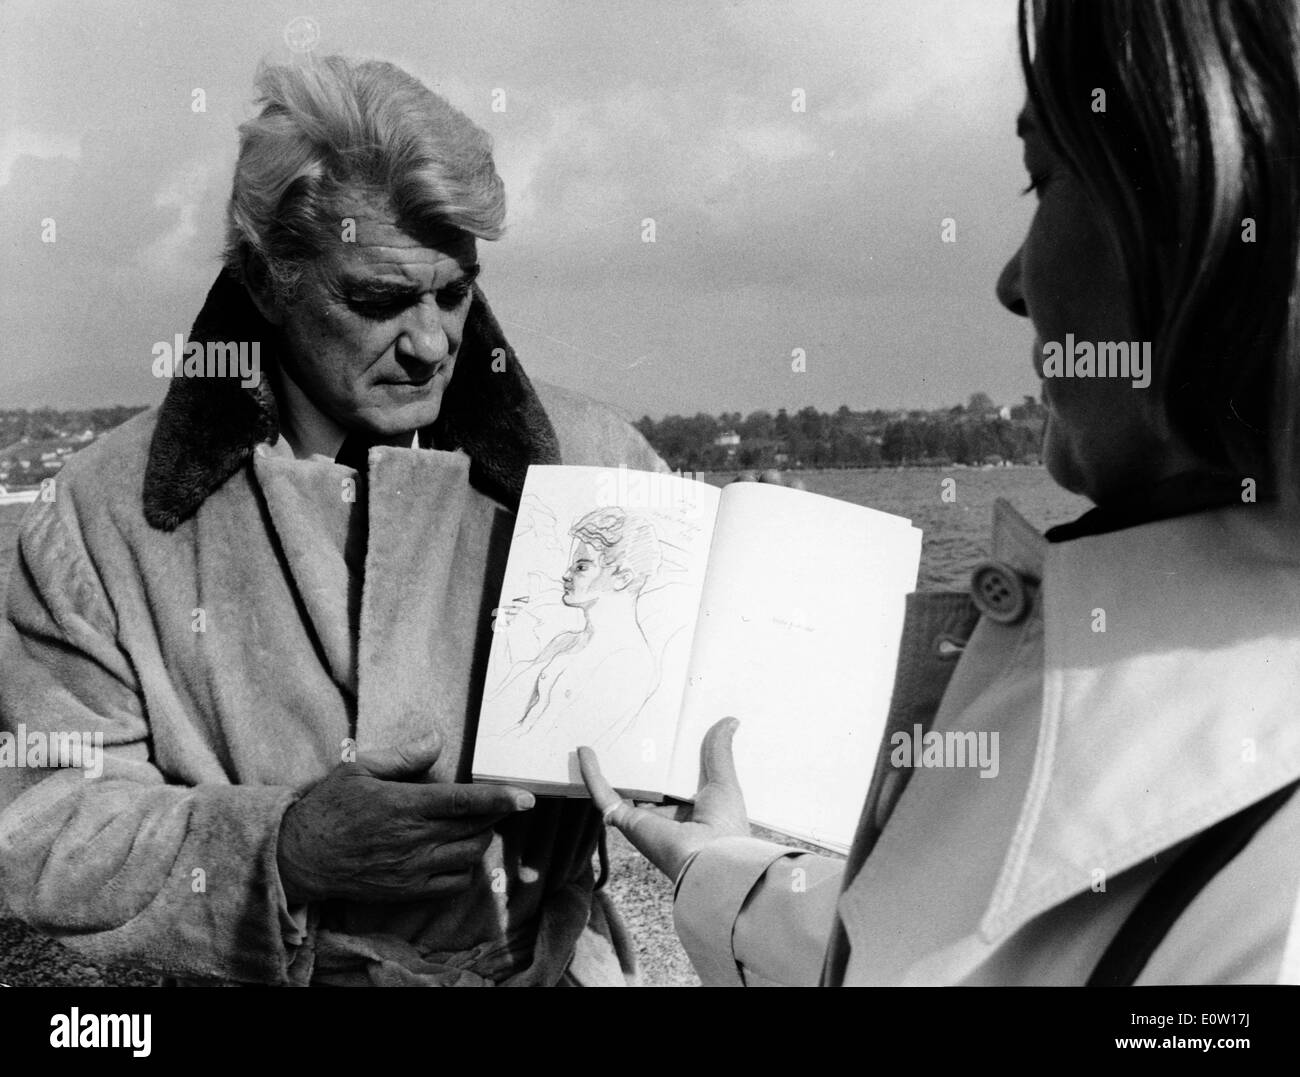 Jean Marais being sketched by an artist Stock Photo